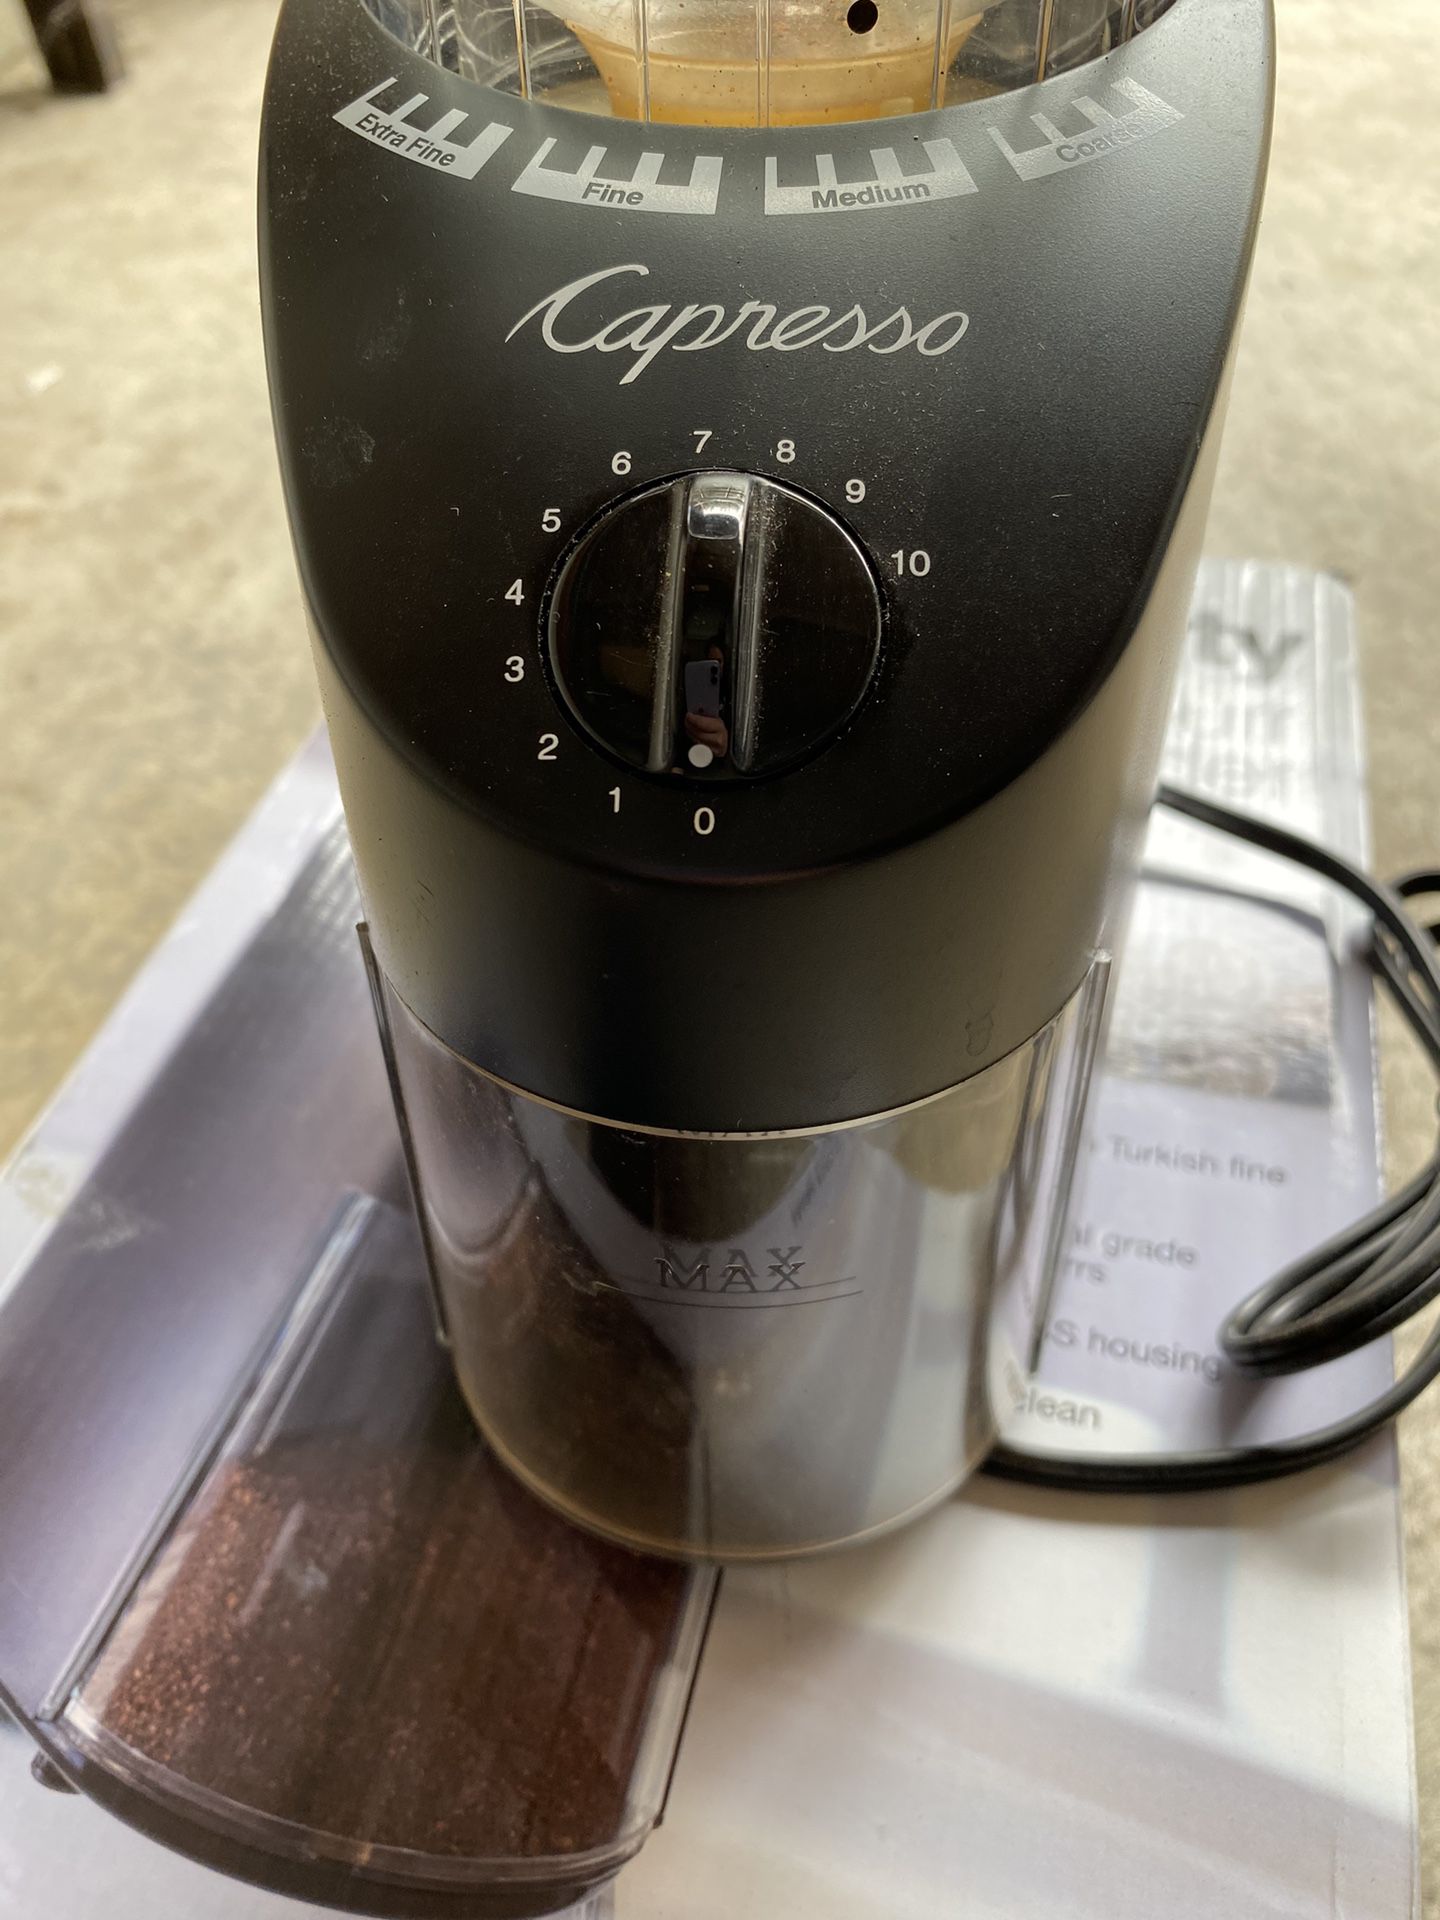 Capresso Infinity Stainless Steel Conical Burr Coffee Grinder for Sale in  Palo Alto, CA - OfferUp